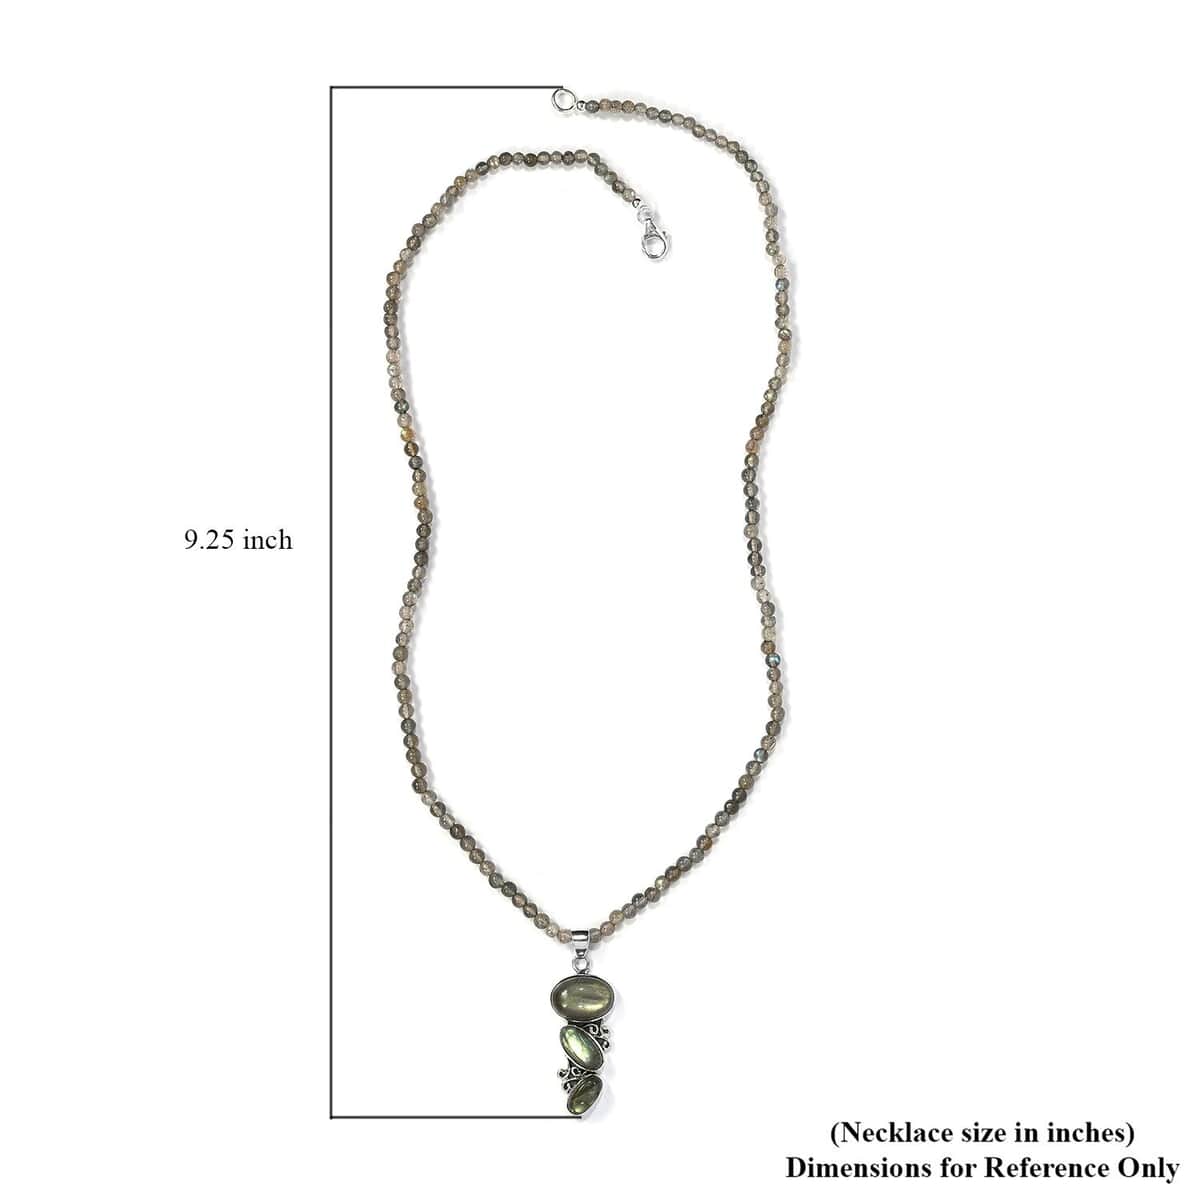 Malagasy Labradorite Bead Necklace in Sterling Silver, Labradorite Pendant, Silver Jewelry Gifts 53.85 ctw (20 Inches) image number 5